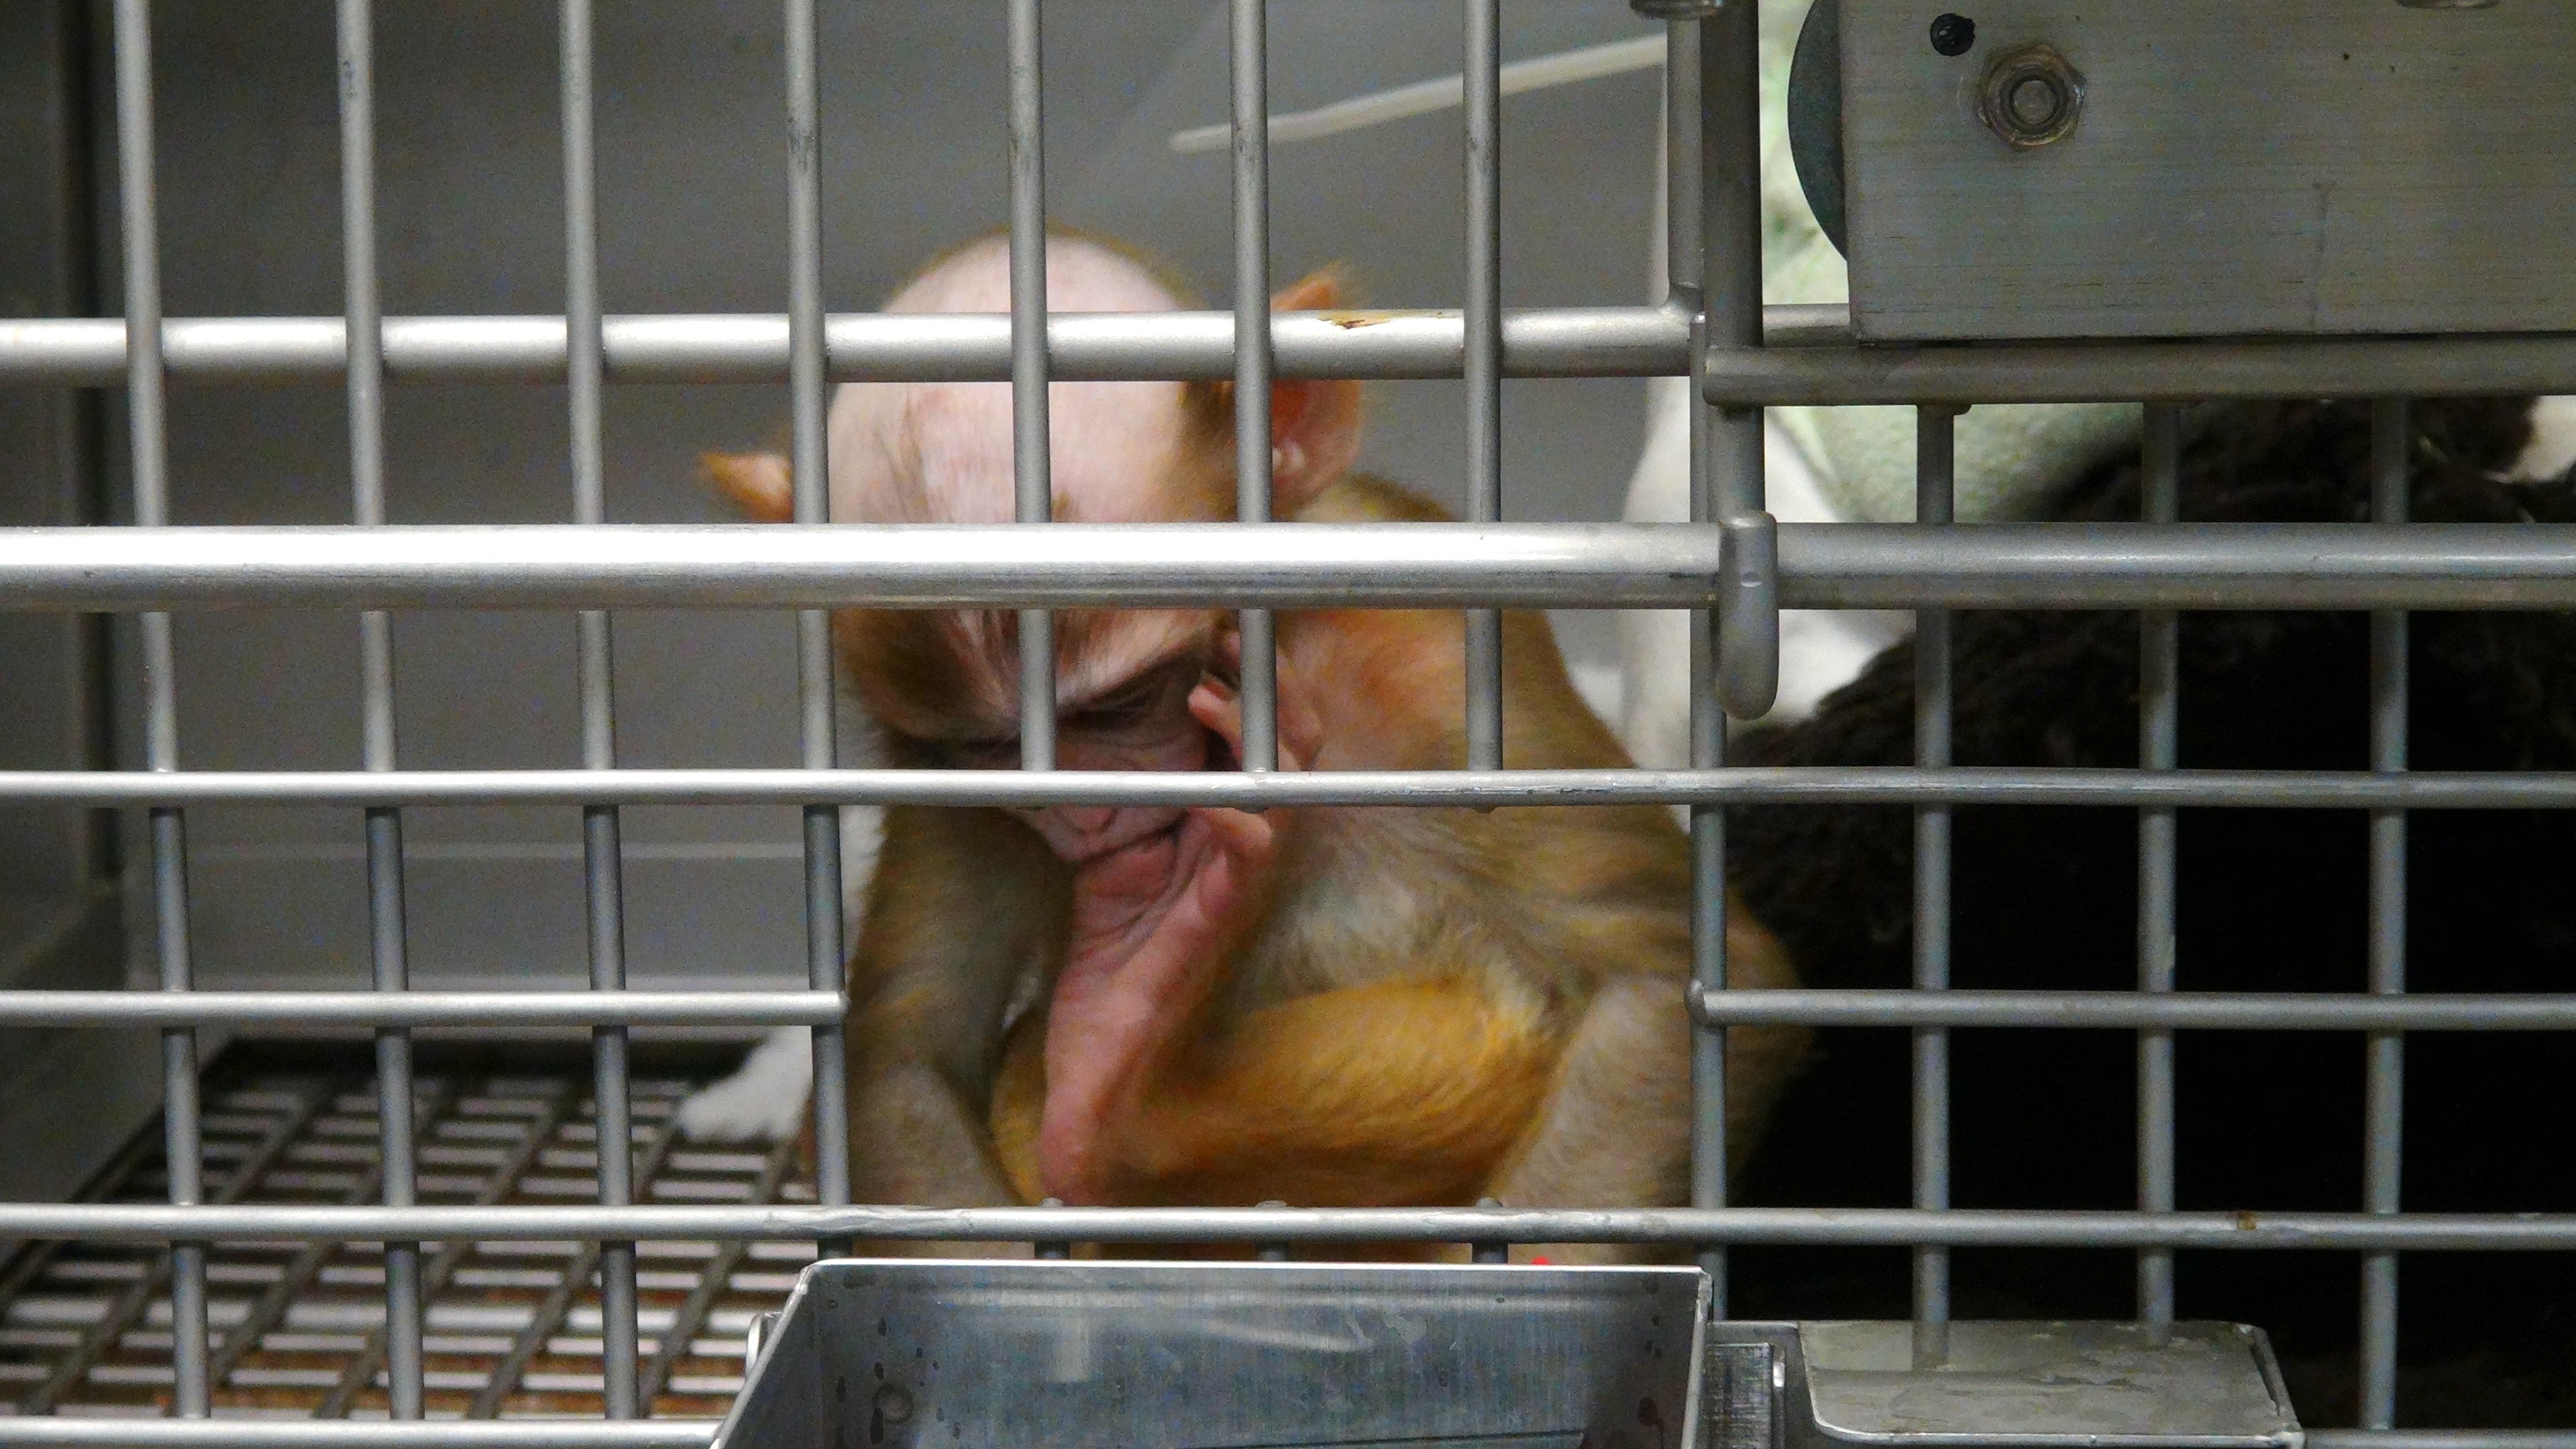 A baby monkey at Harvard suckling on their foot while sitting in a cage.